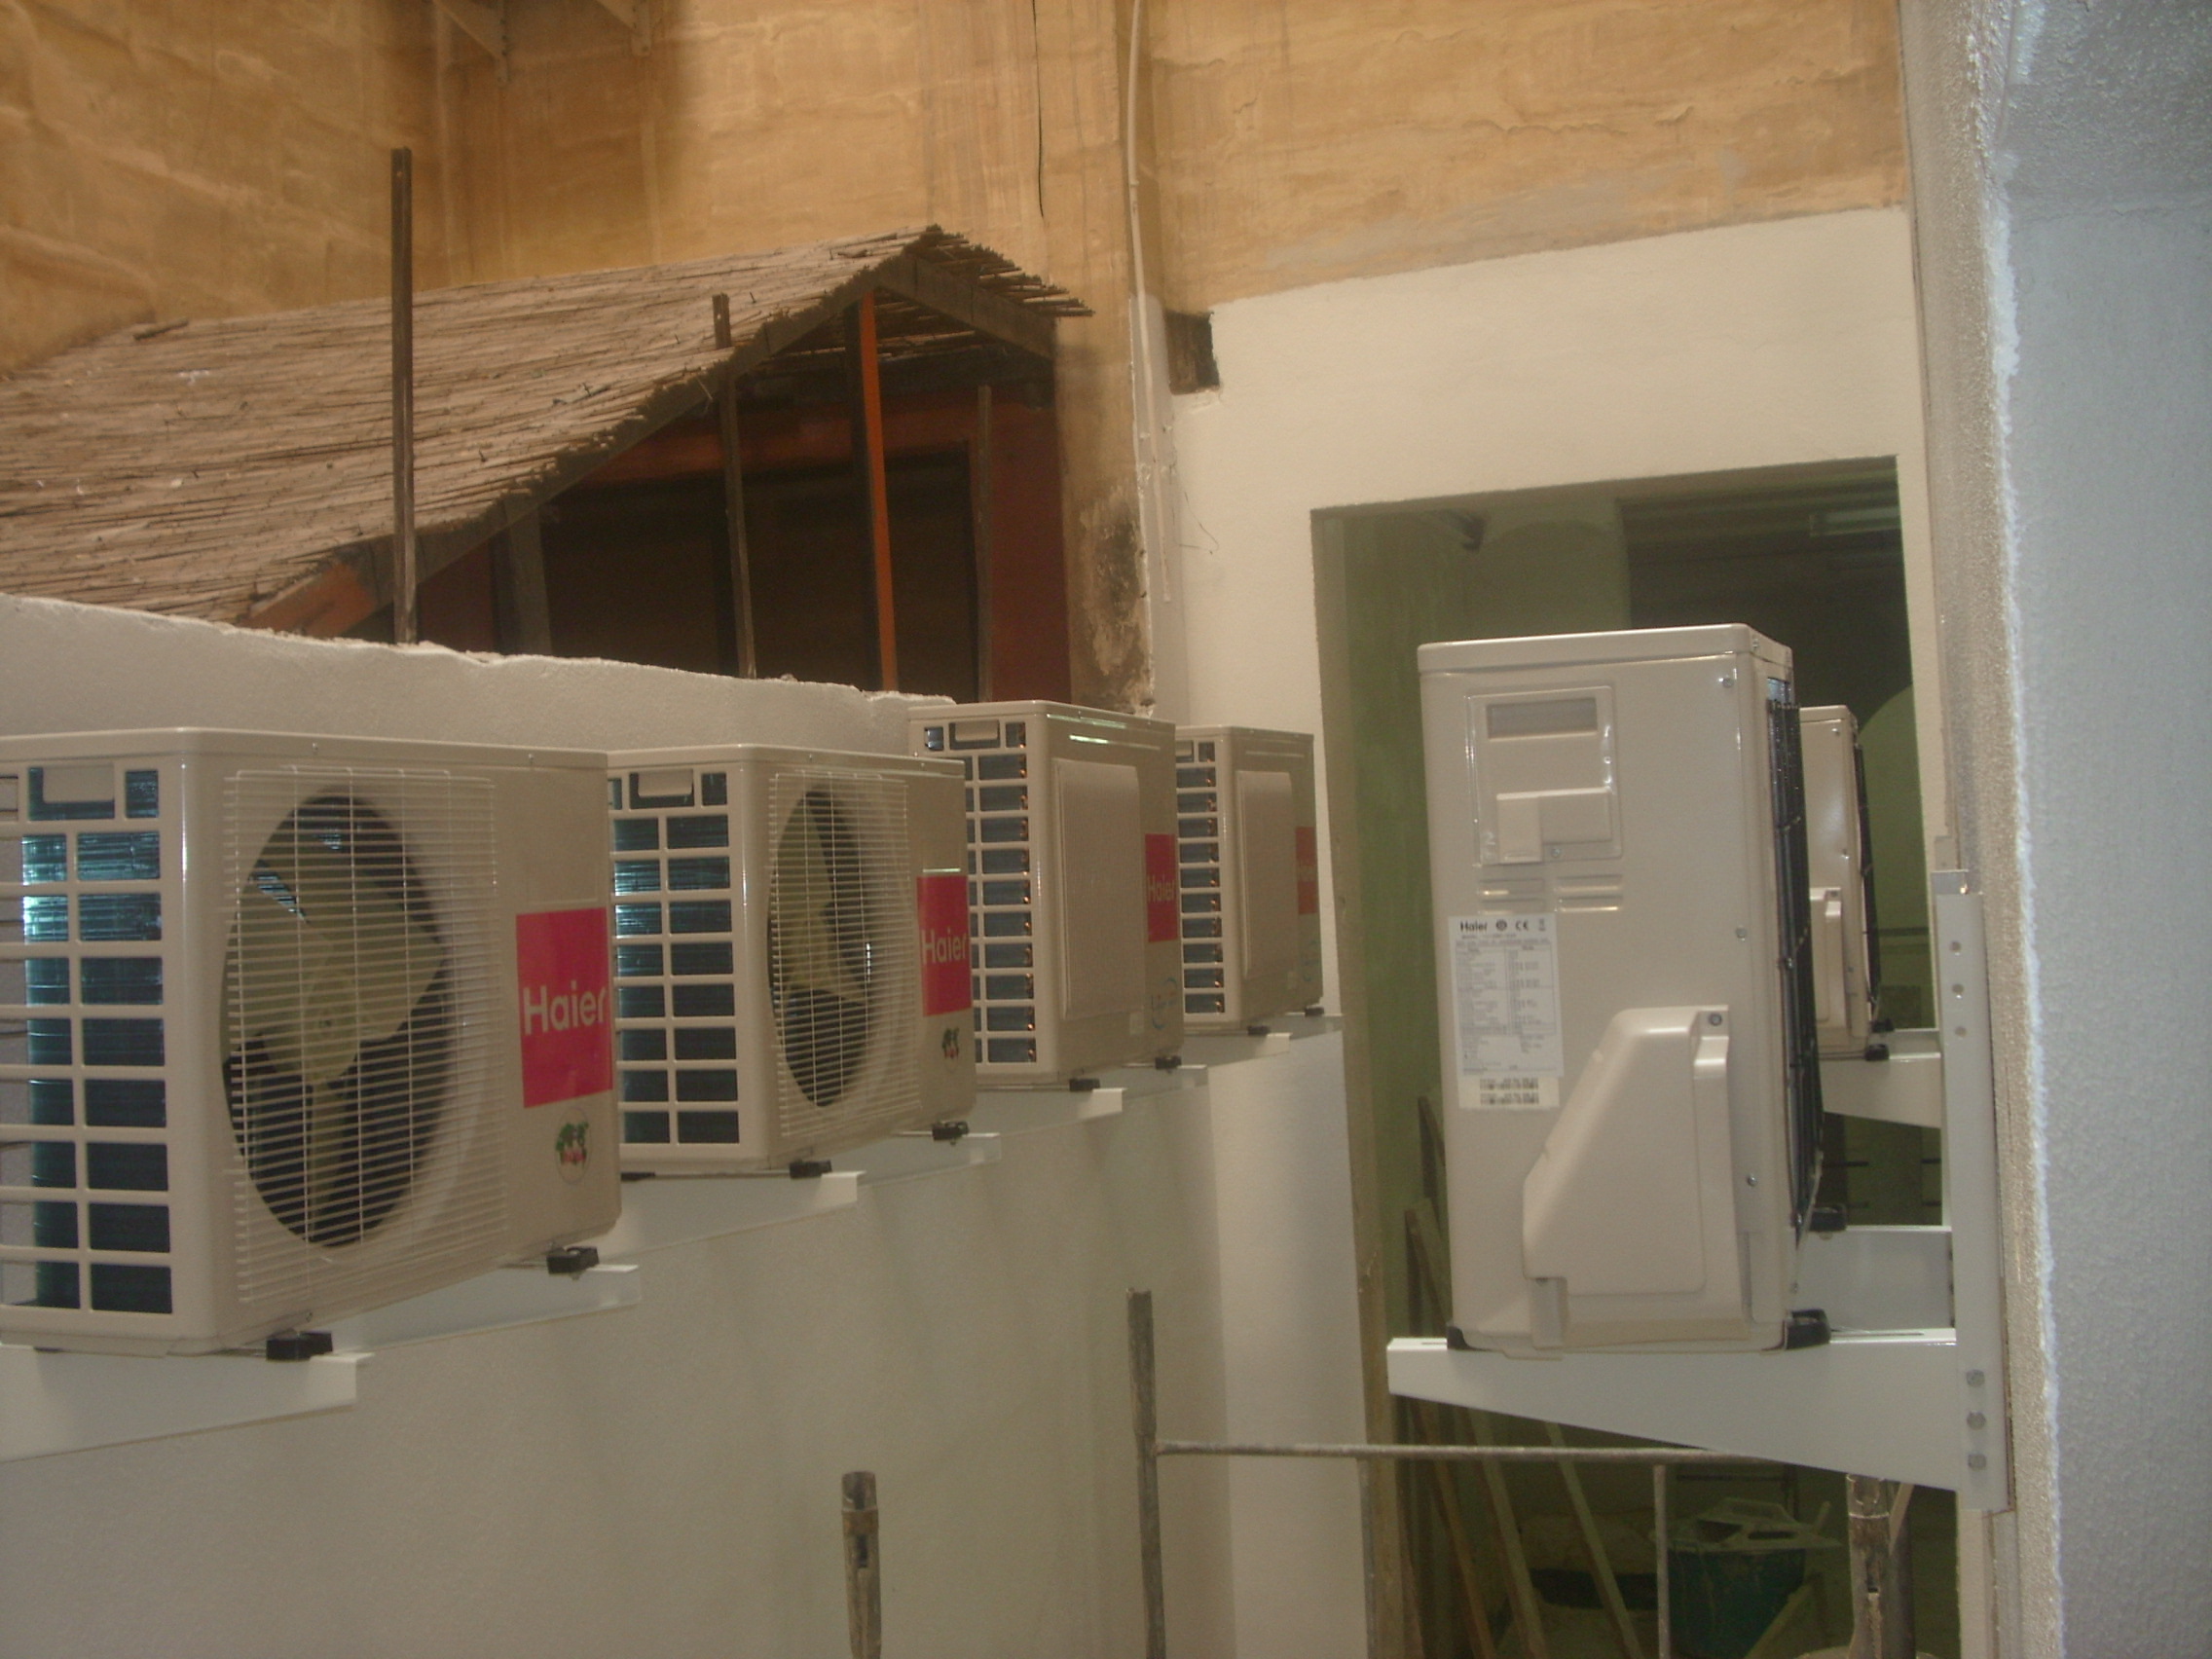 Haier Air Conditioning Outdoor Unit